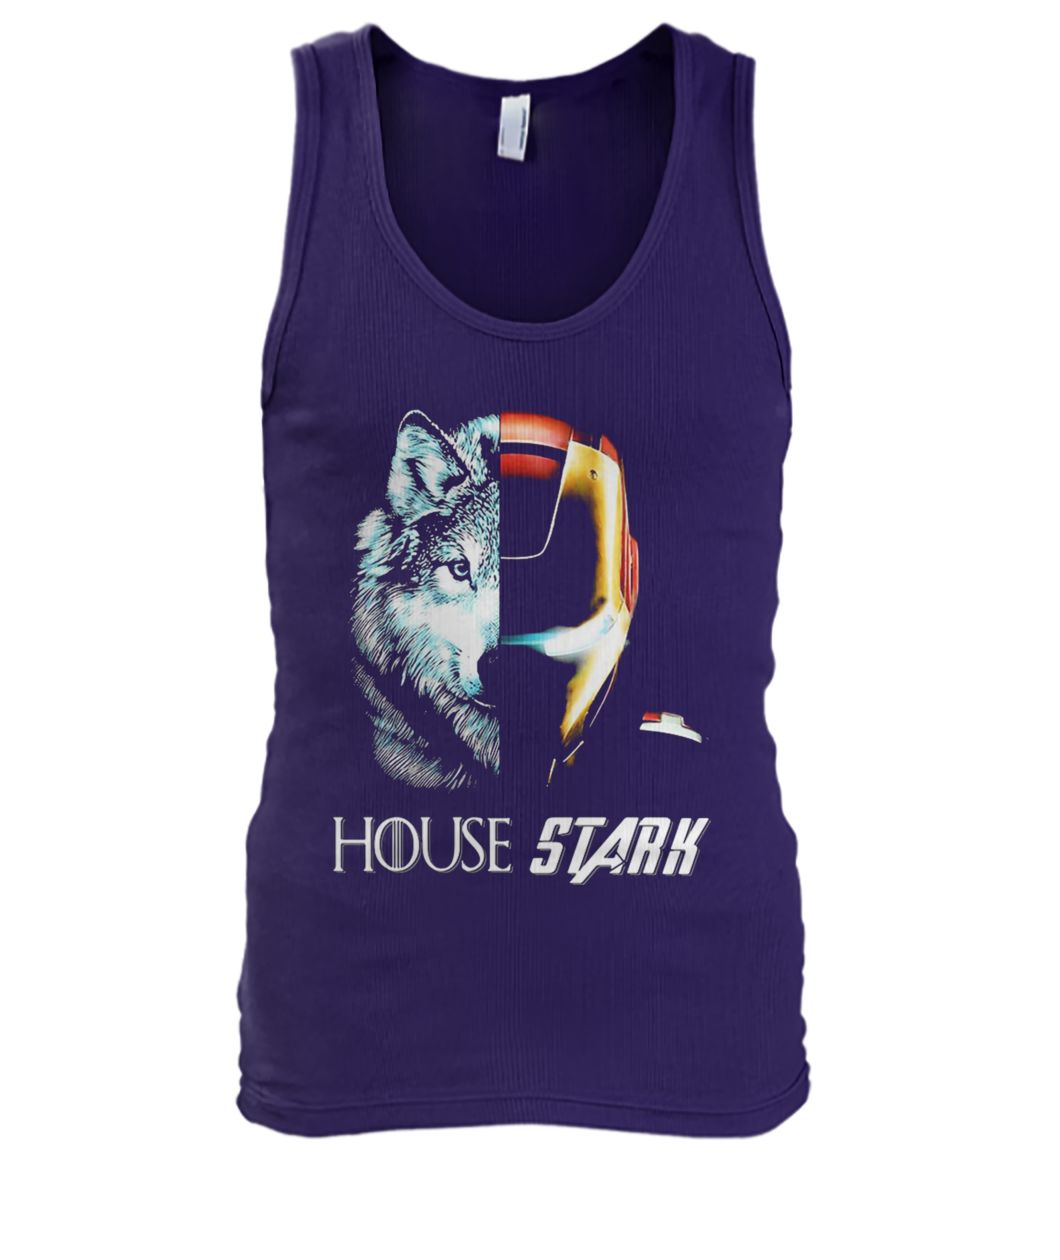 Game of thrones and avengers direwolf iron man mash up men's tank top